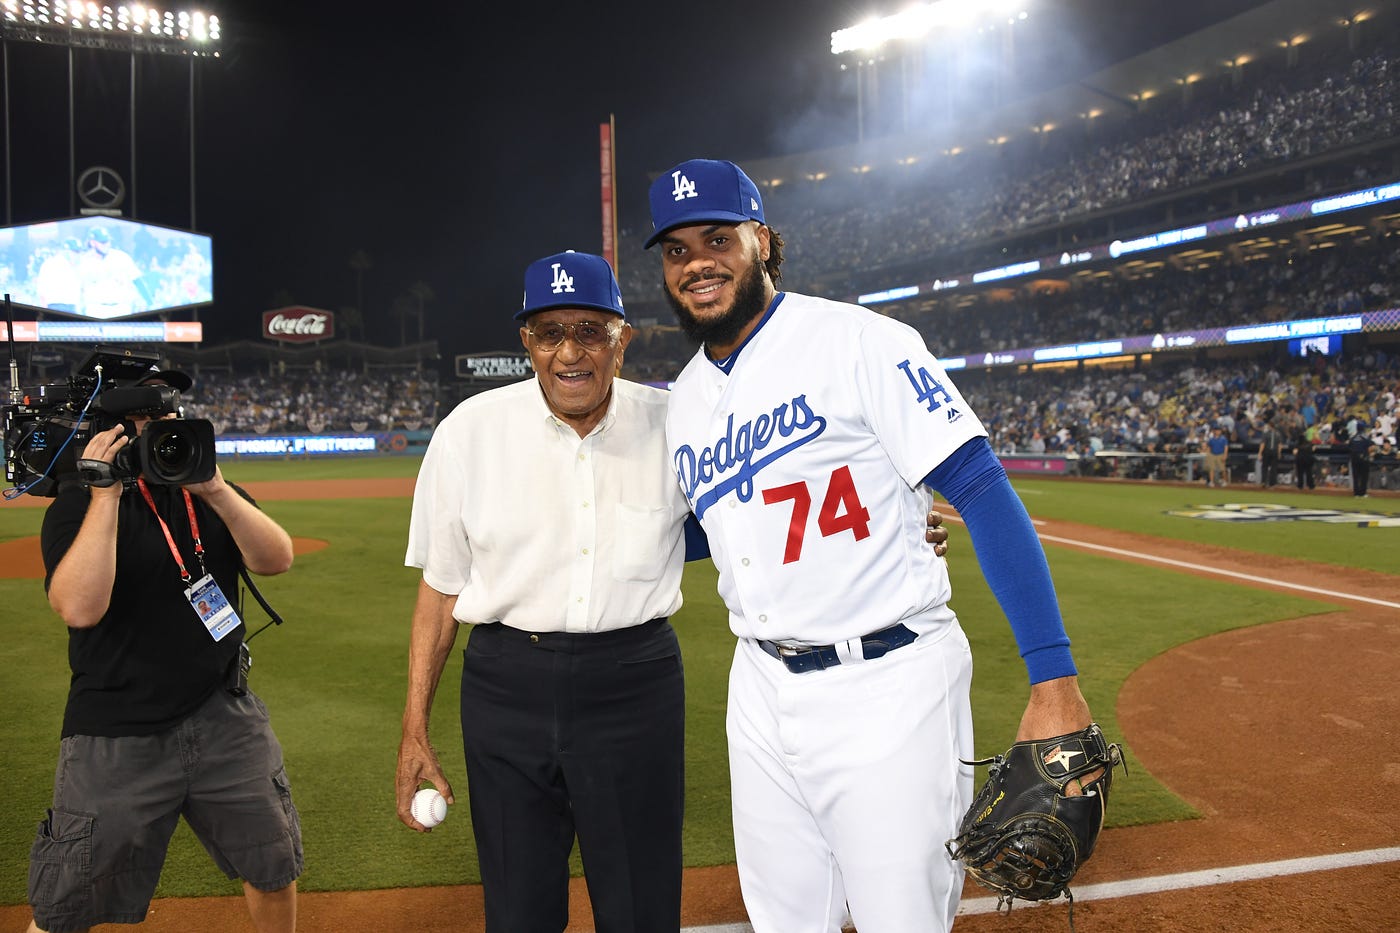 Dodgers to wear uniform patch to honor Don Newcombe | by Rowan Kavner |  Dodger Insider